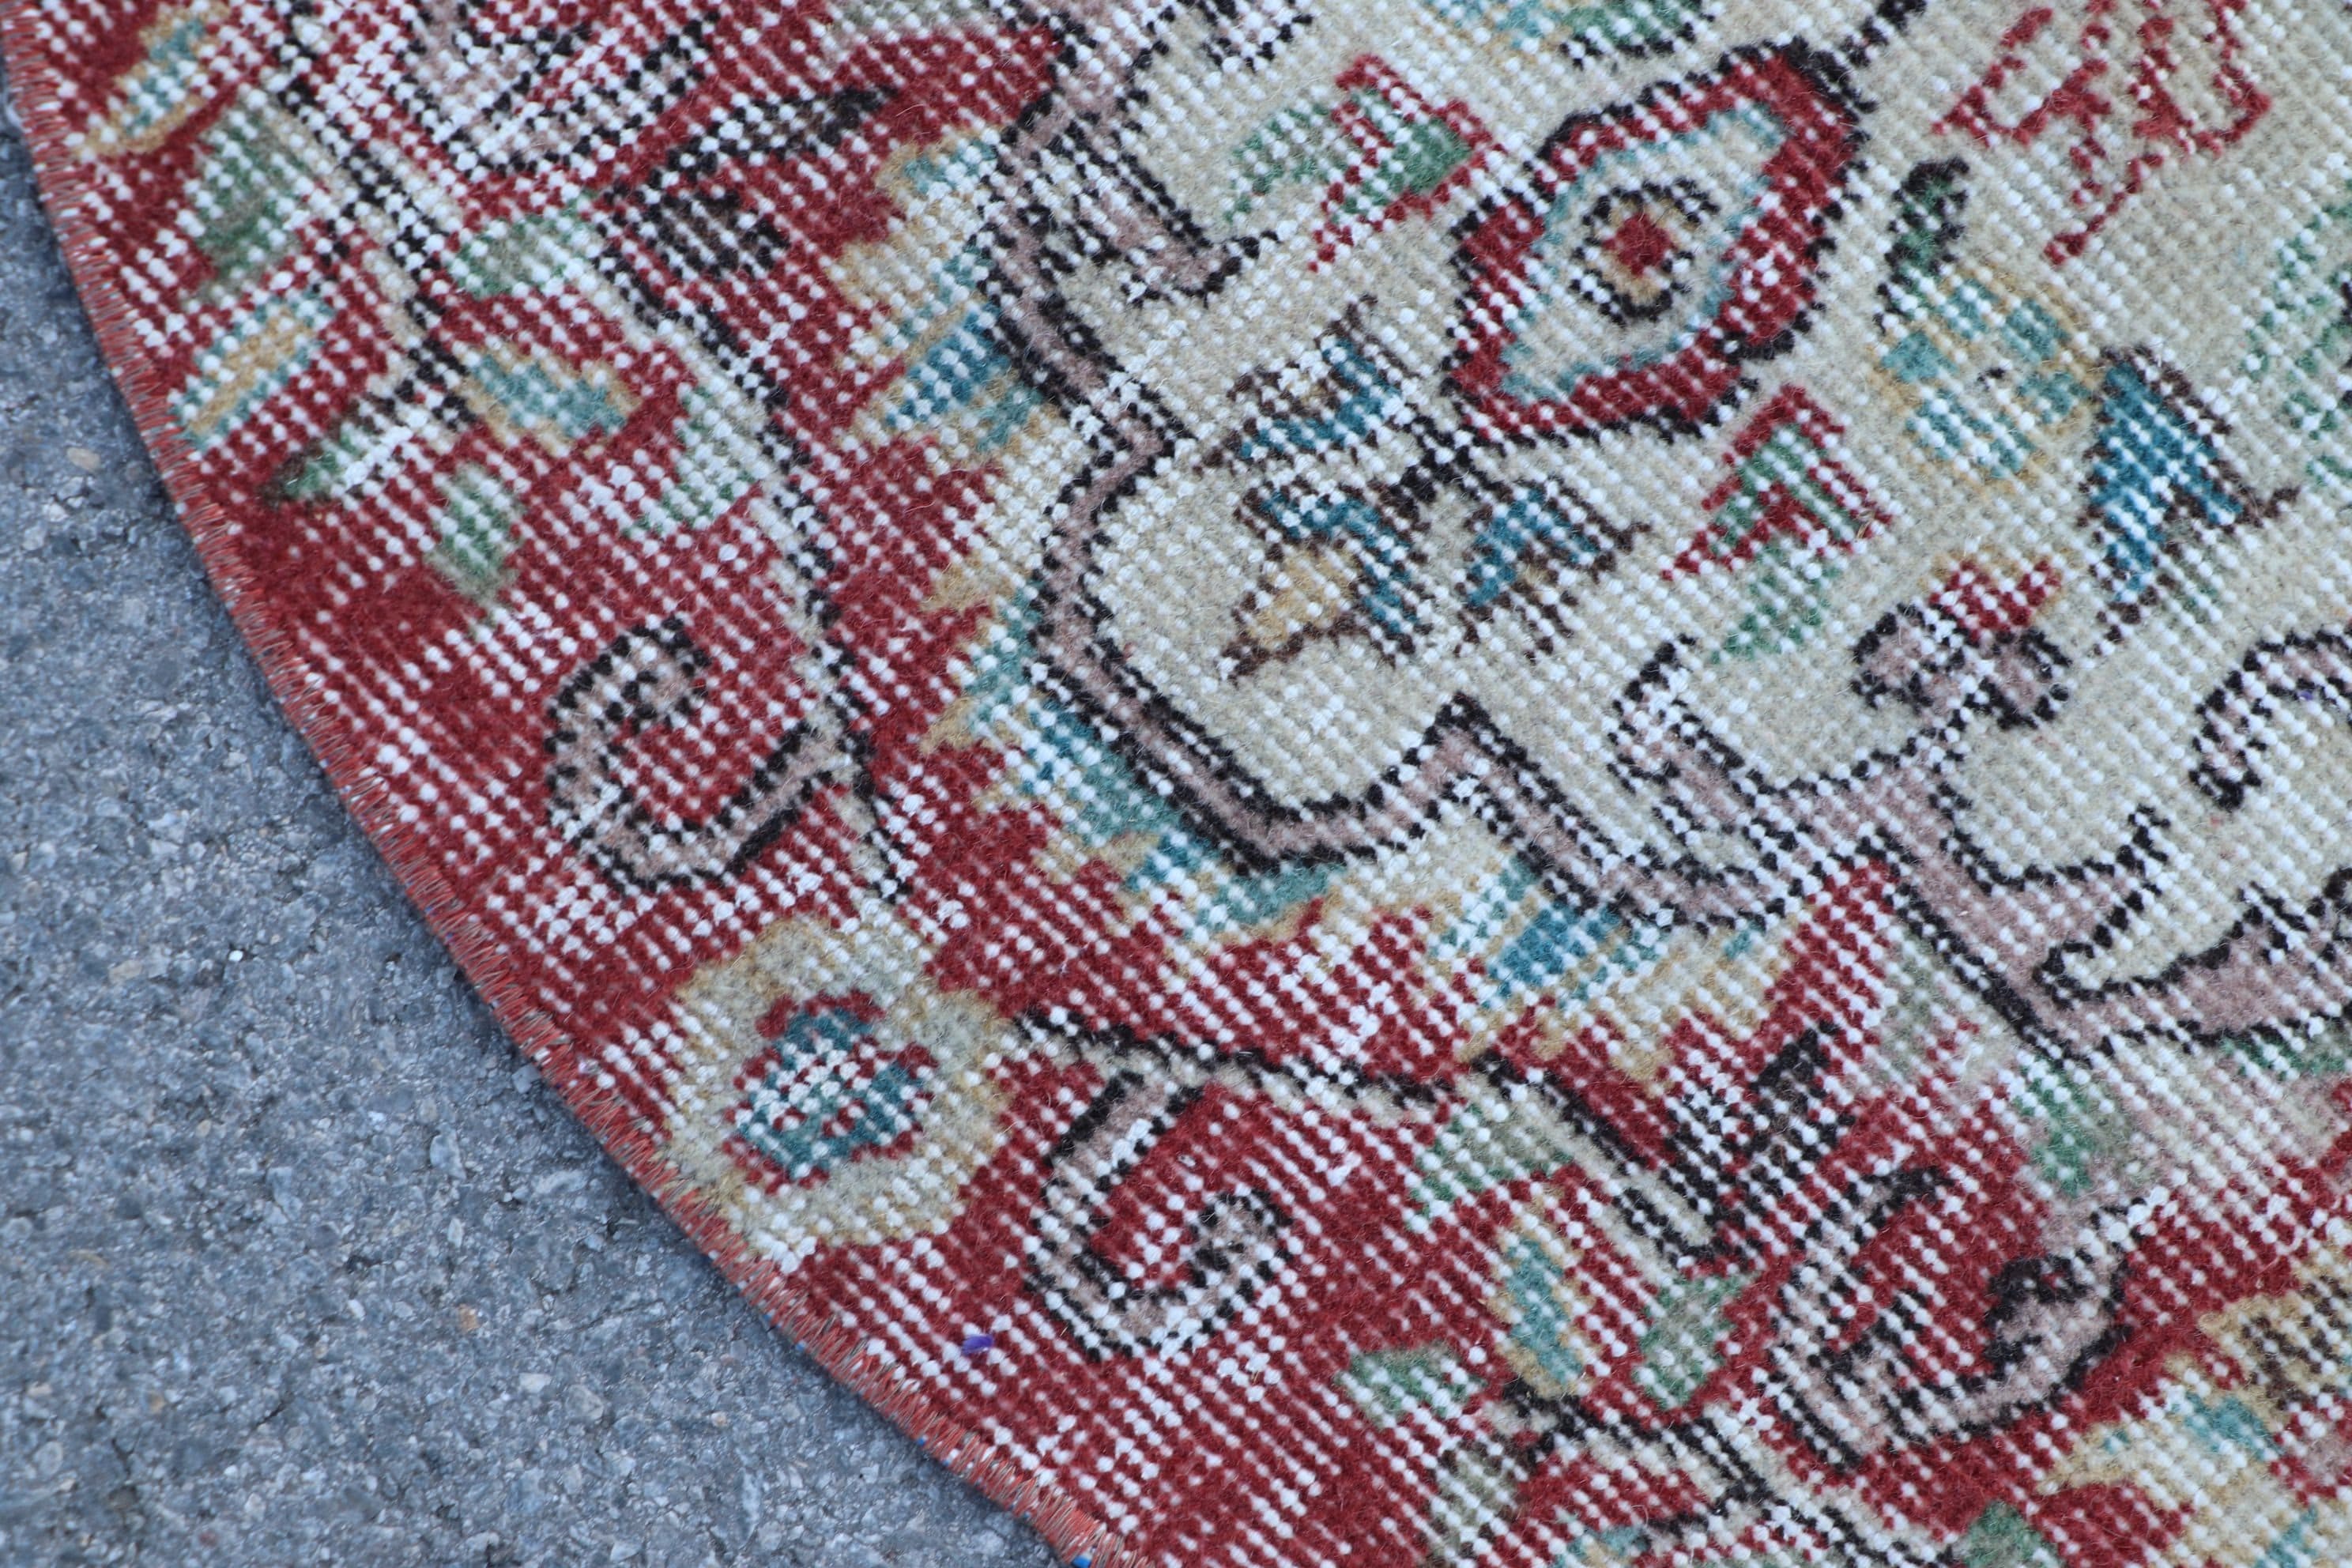 Red Home Decor Rug, Oriental Rug, Nursery Rug, Oushak Rug, Turkish Rug, Car Mat Rugs, 3x3 ft Small Rugs, Vintage Rugs, Rugs for Entry